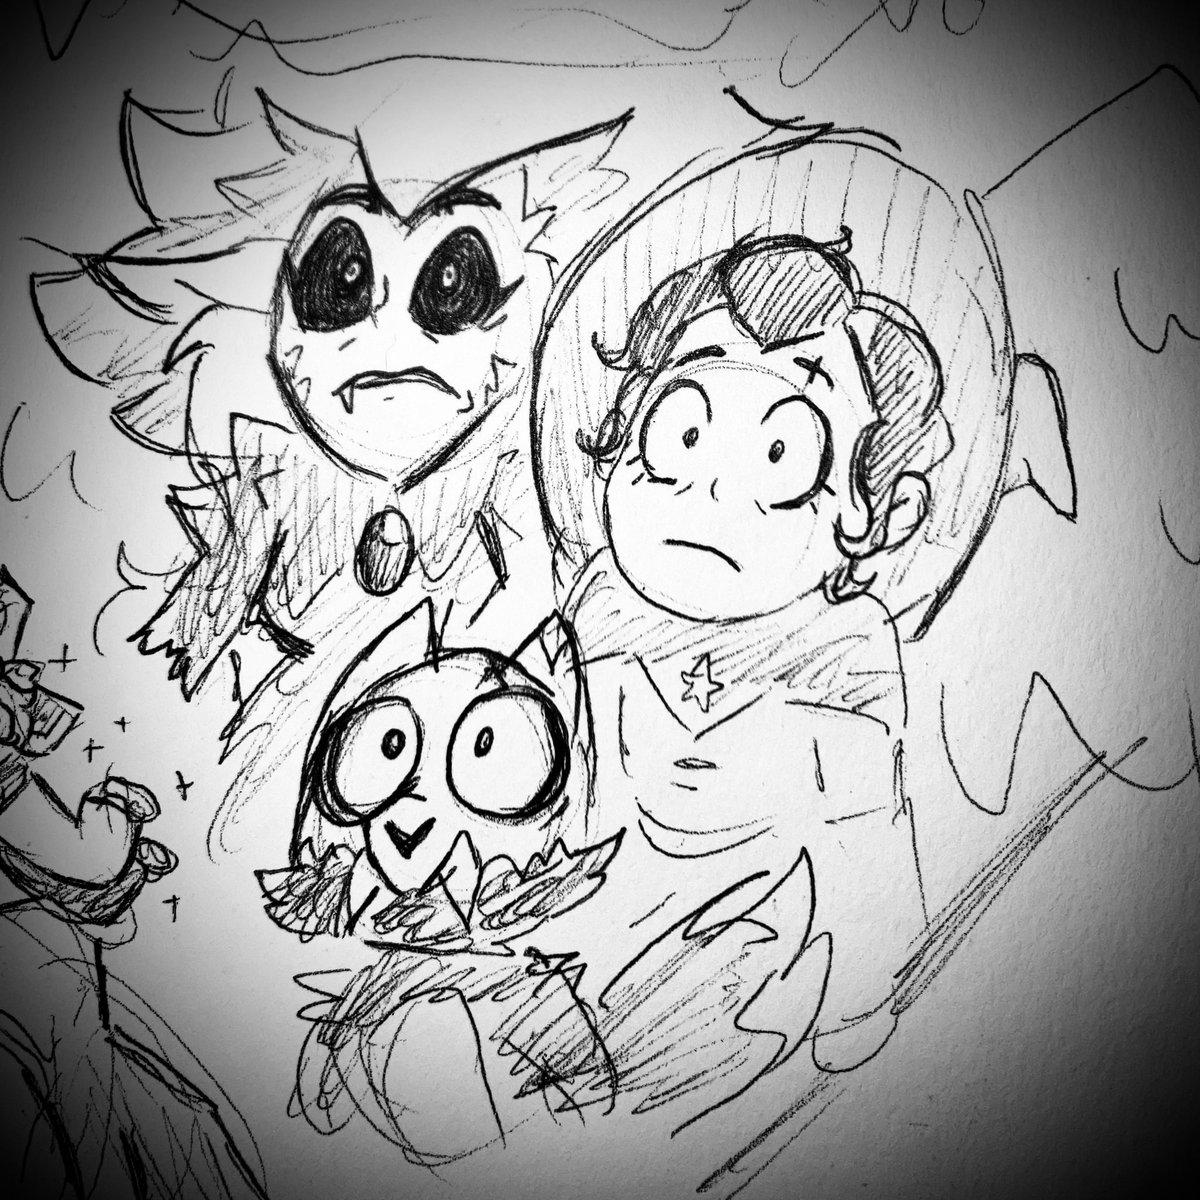 ☀️✨🦉🏠🌙
Doodles from the perfect finale of TOH and I’m still so broken 💔
(sorry in advance for this set)
#TOH #TheOwlHouse #WatchingandDreaming #WAD #Finale #Luz #Eda #King The finale was perfect I have so many doodles to share 💖